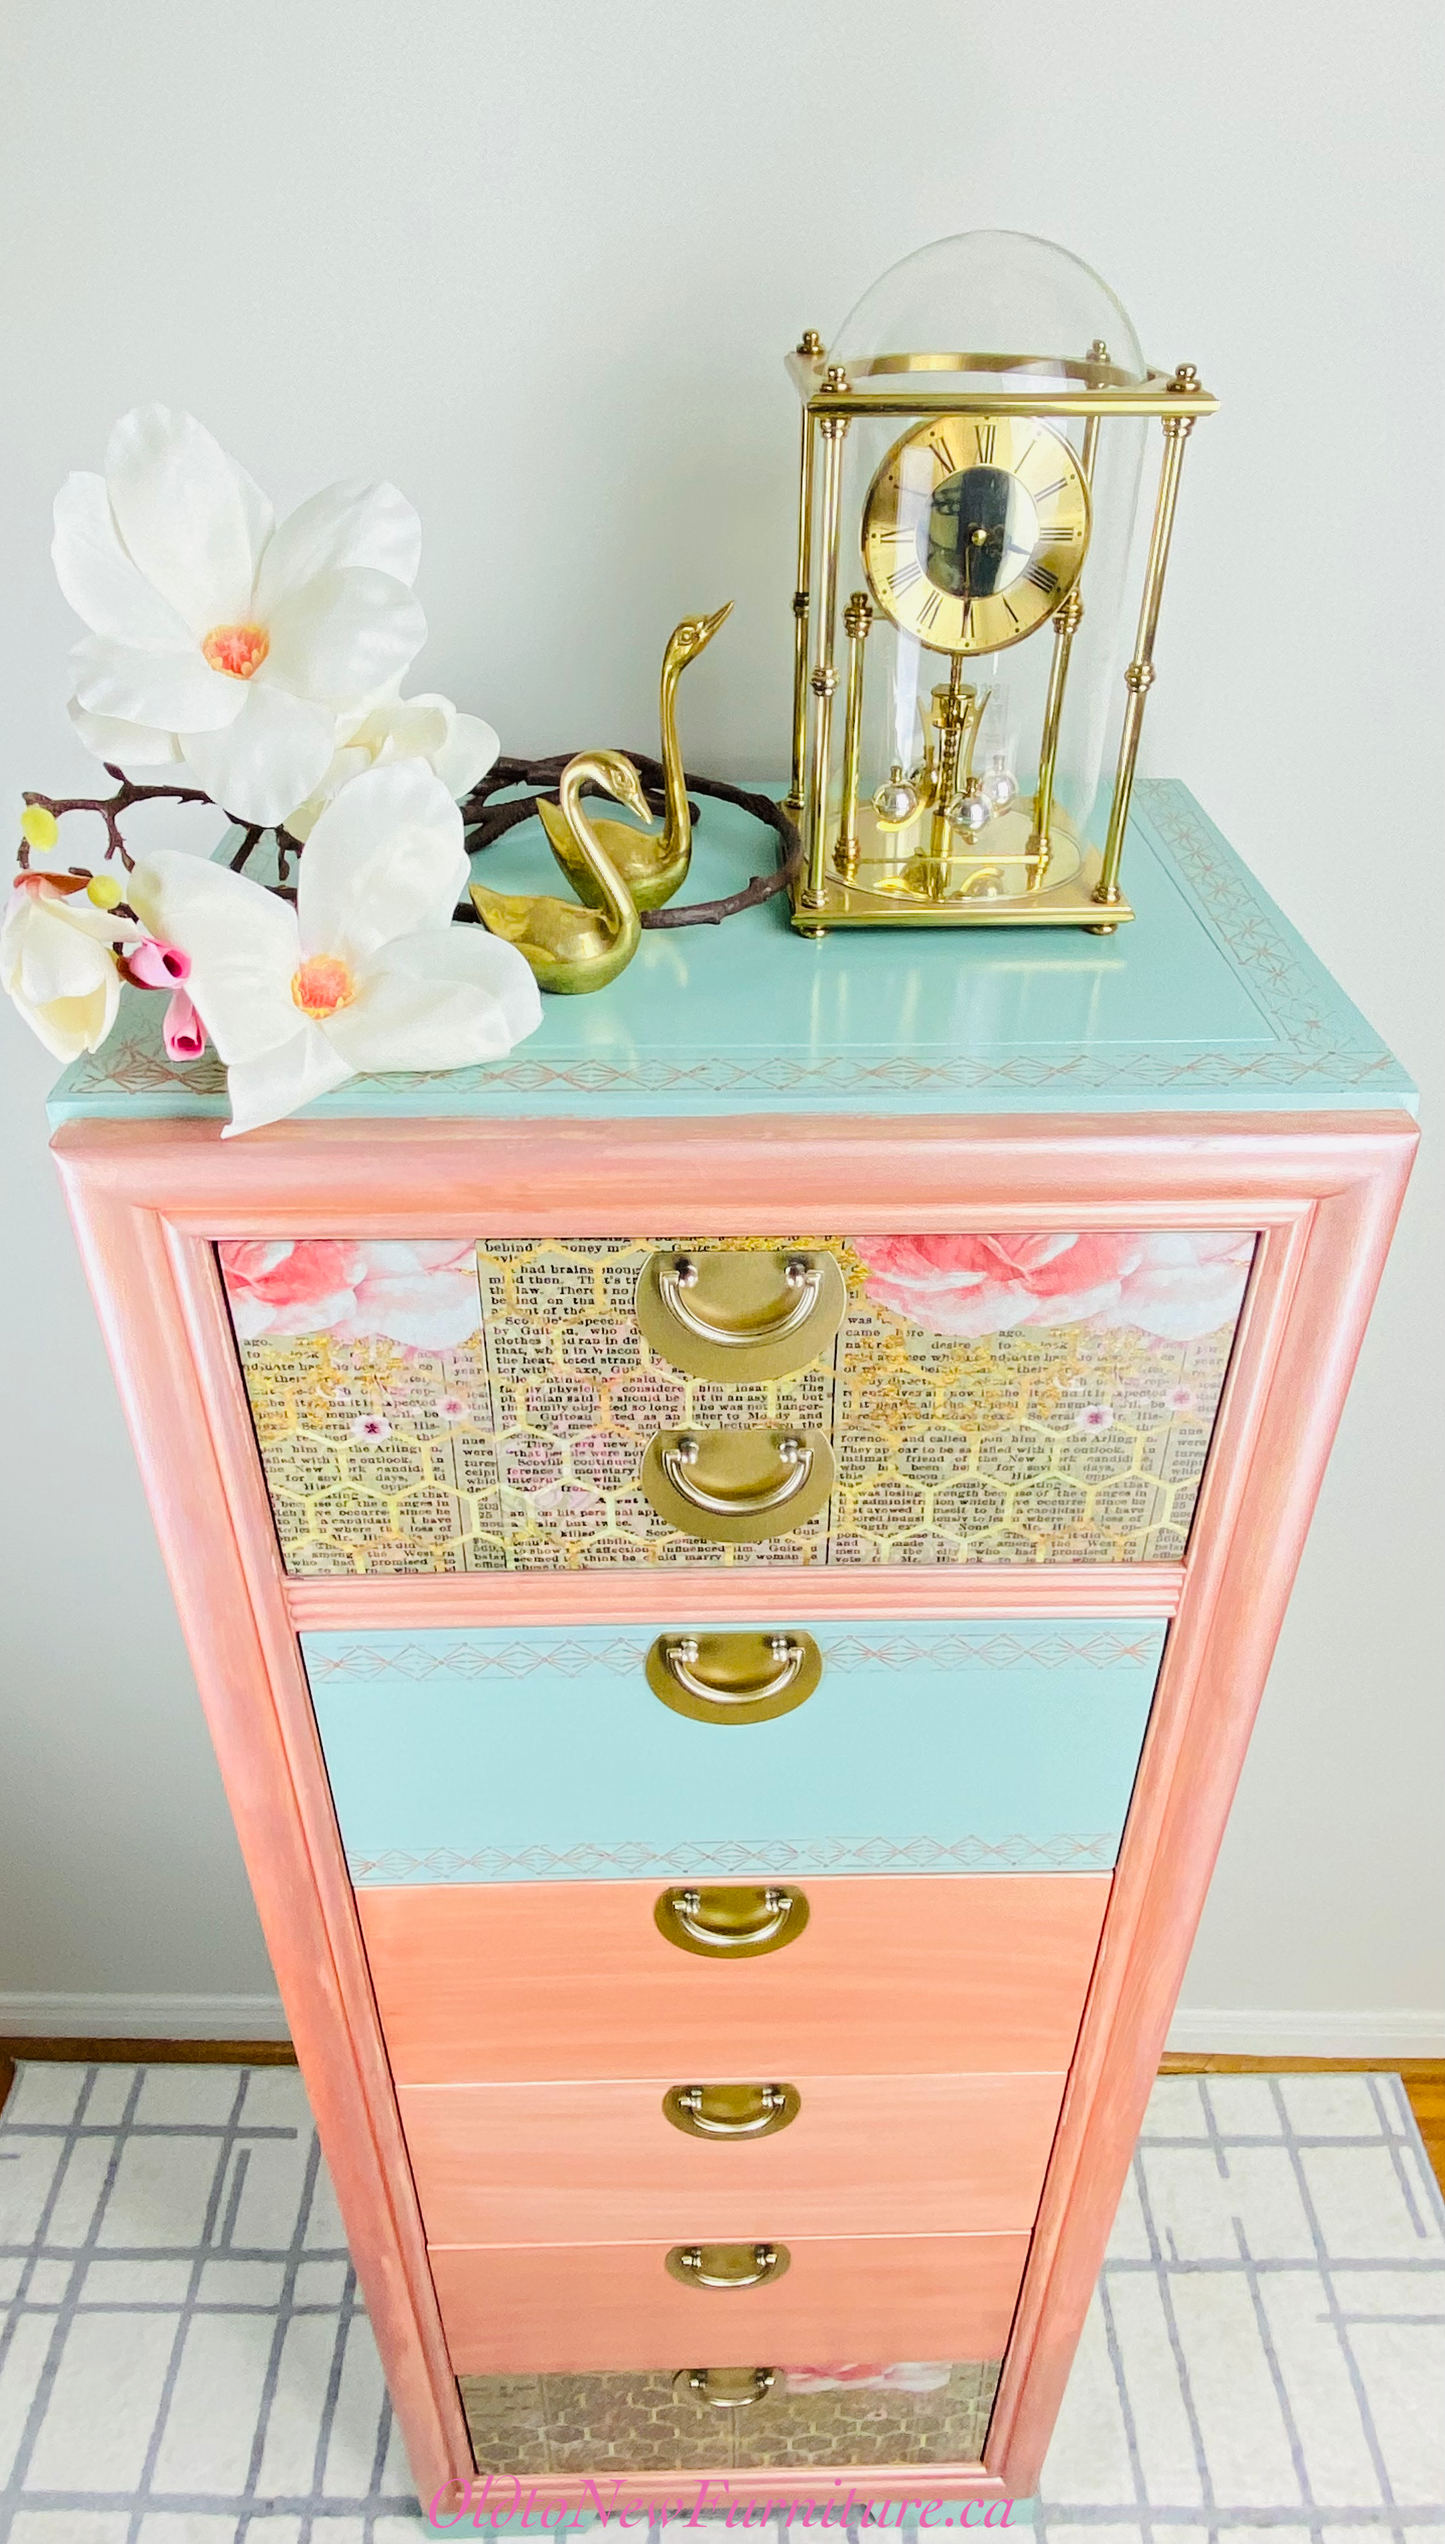 Gorgeous Kroehler Canada Antique 6 Drawer Lingerie Dresser Painted Teal with Metallic Copper, Pink Tones and Decoupaged.